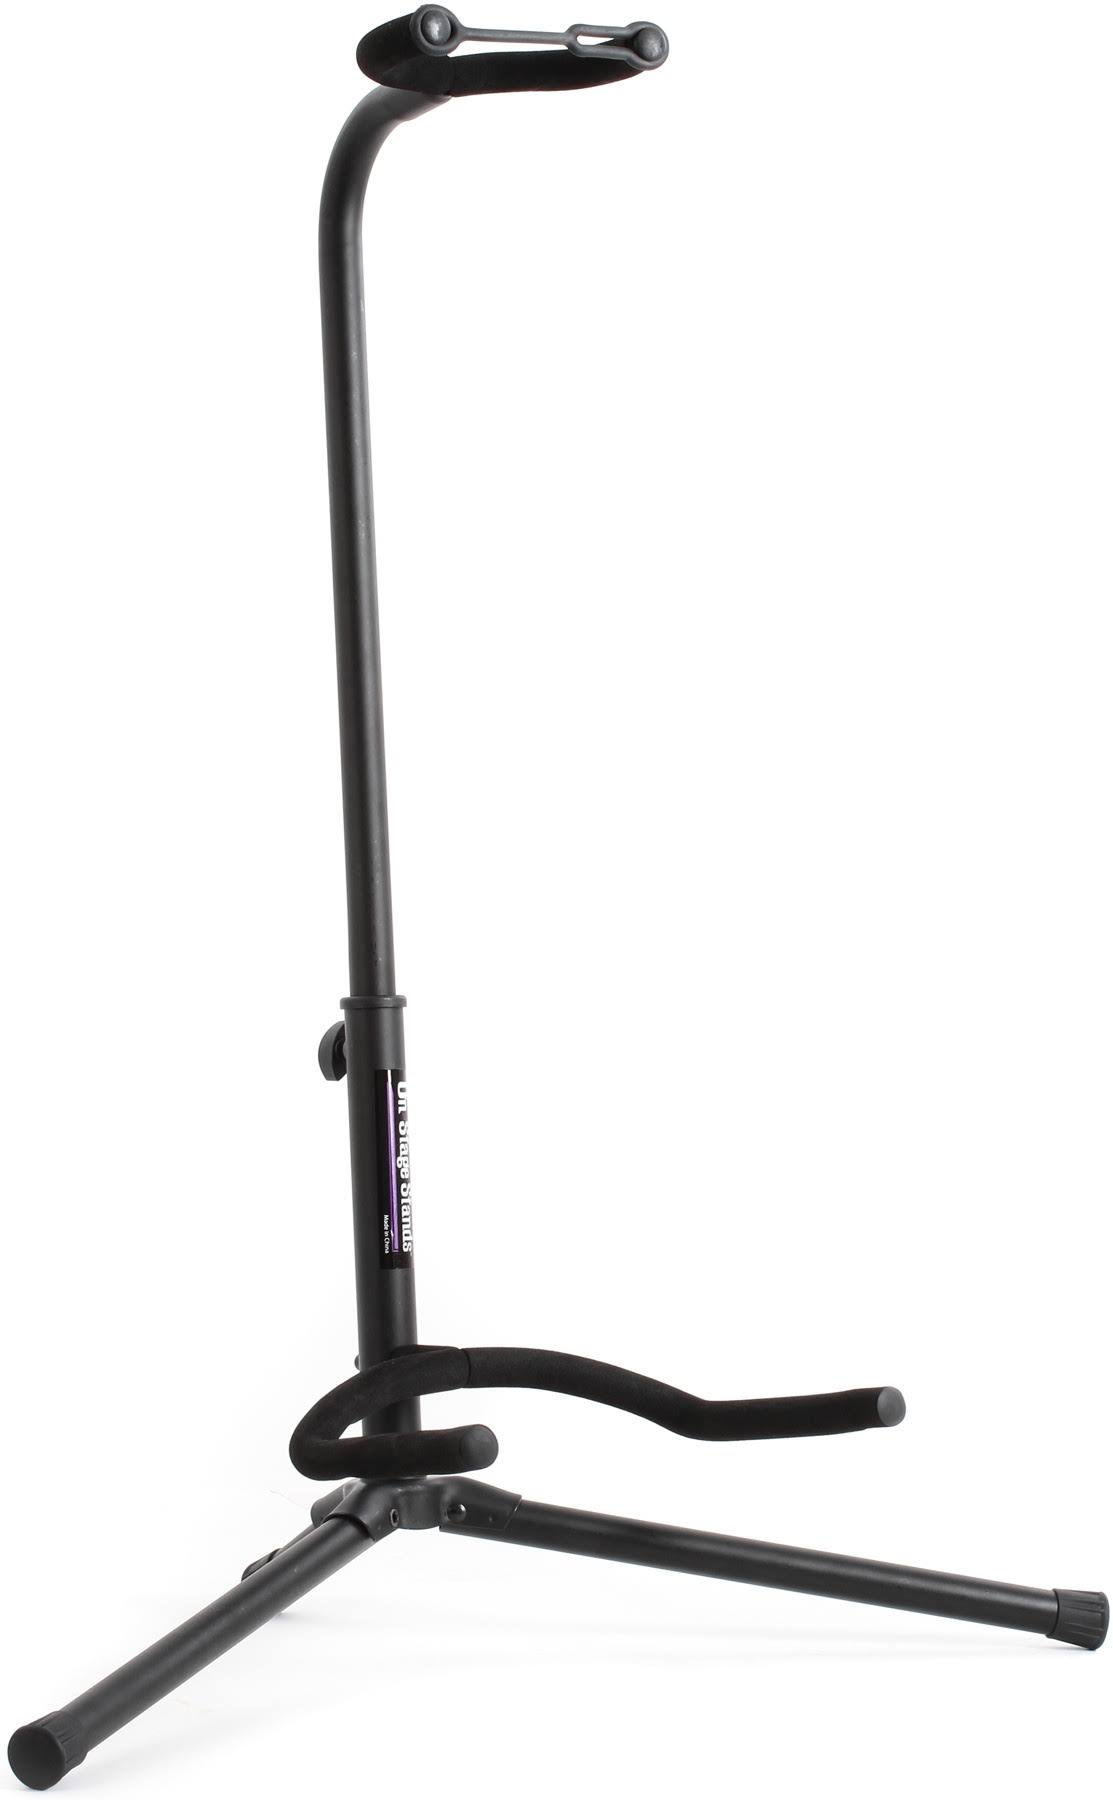 On Stage Xcg4 On Stage Onstage Tripod Guitar Stand - Black